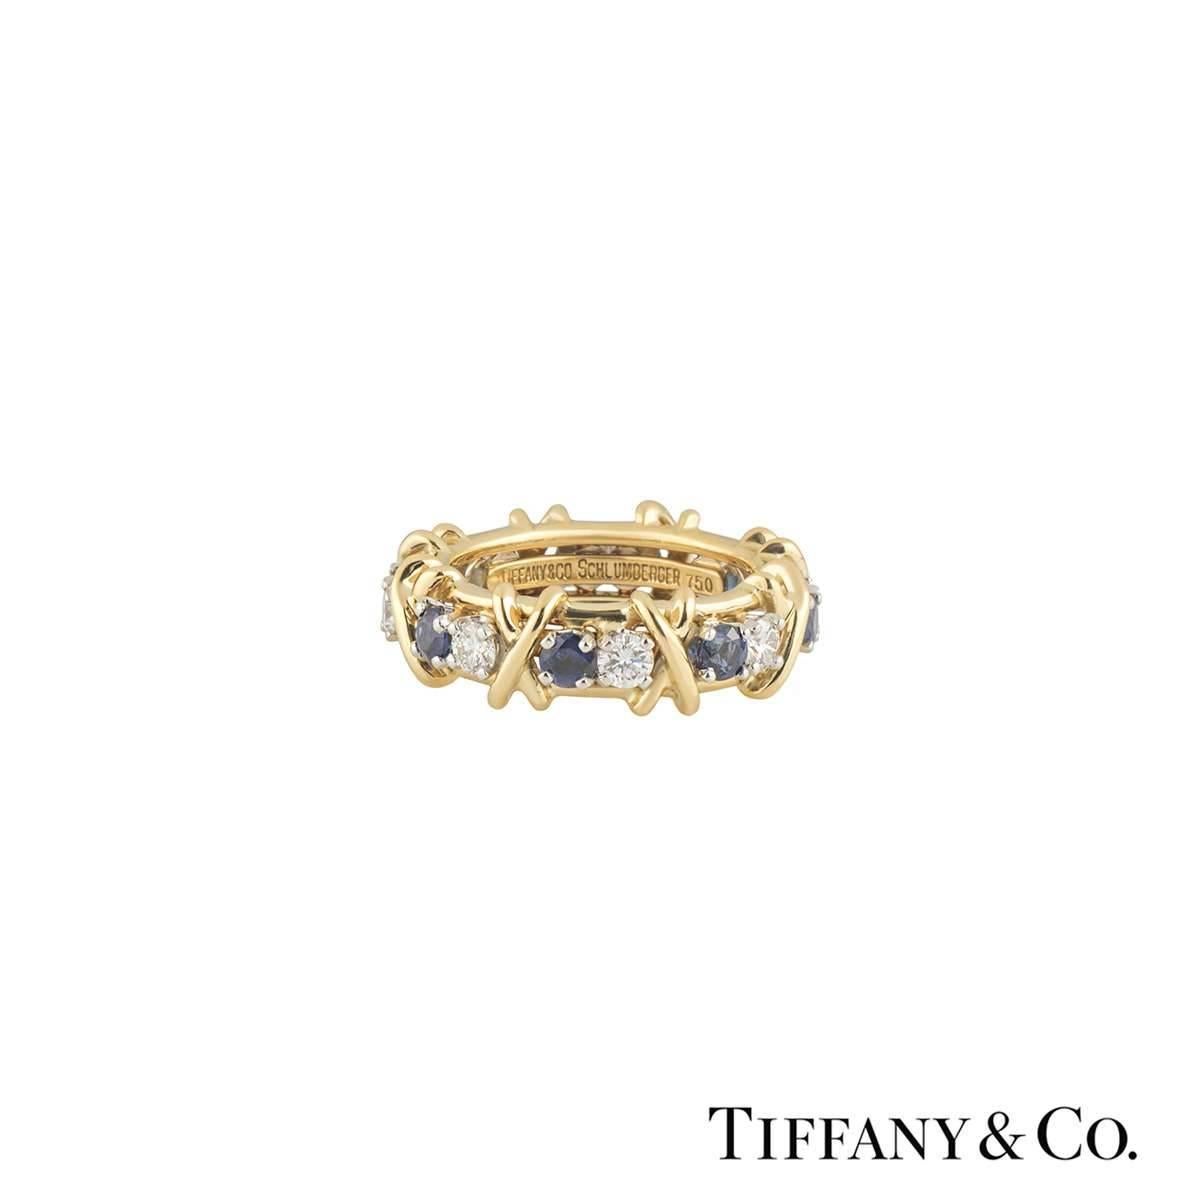 A beautiful 18k yellow gold diamond and sapphire Tiffany & Co. ring from the Schlumberger collection. The ring comprises of 8 round brilliant cut diamonds alternating with 8 round cut sapphires and accentuated with the iconic signature 'X' motif